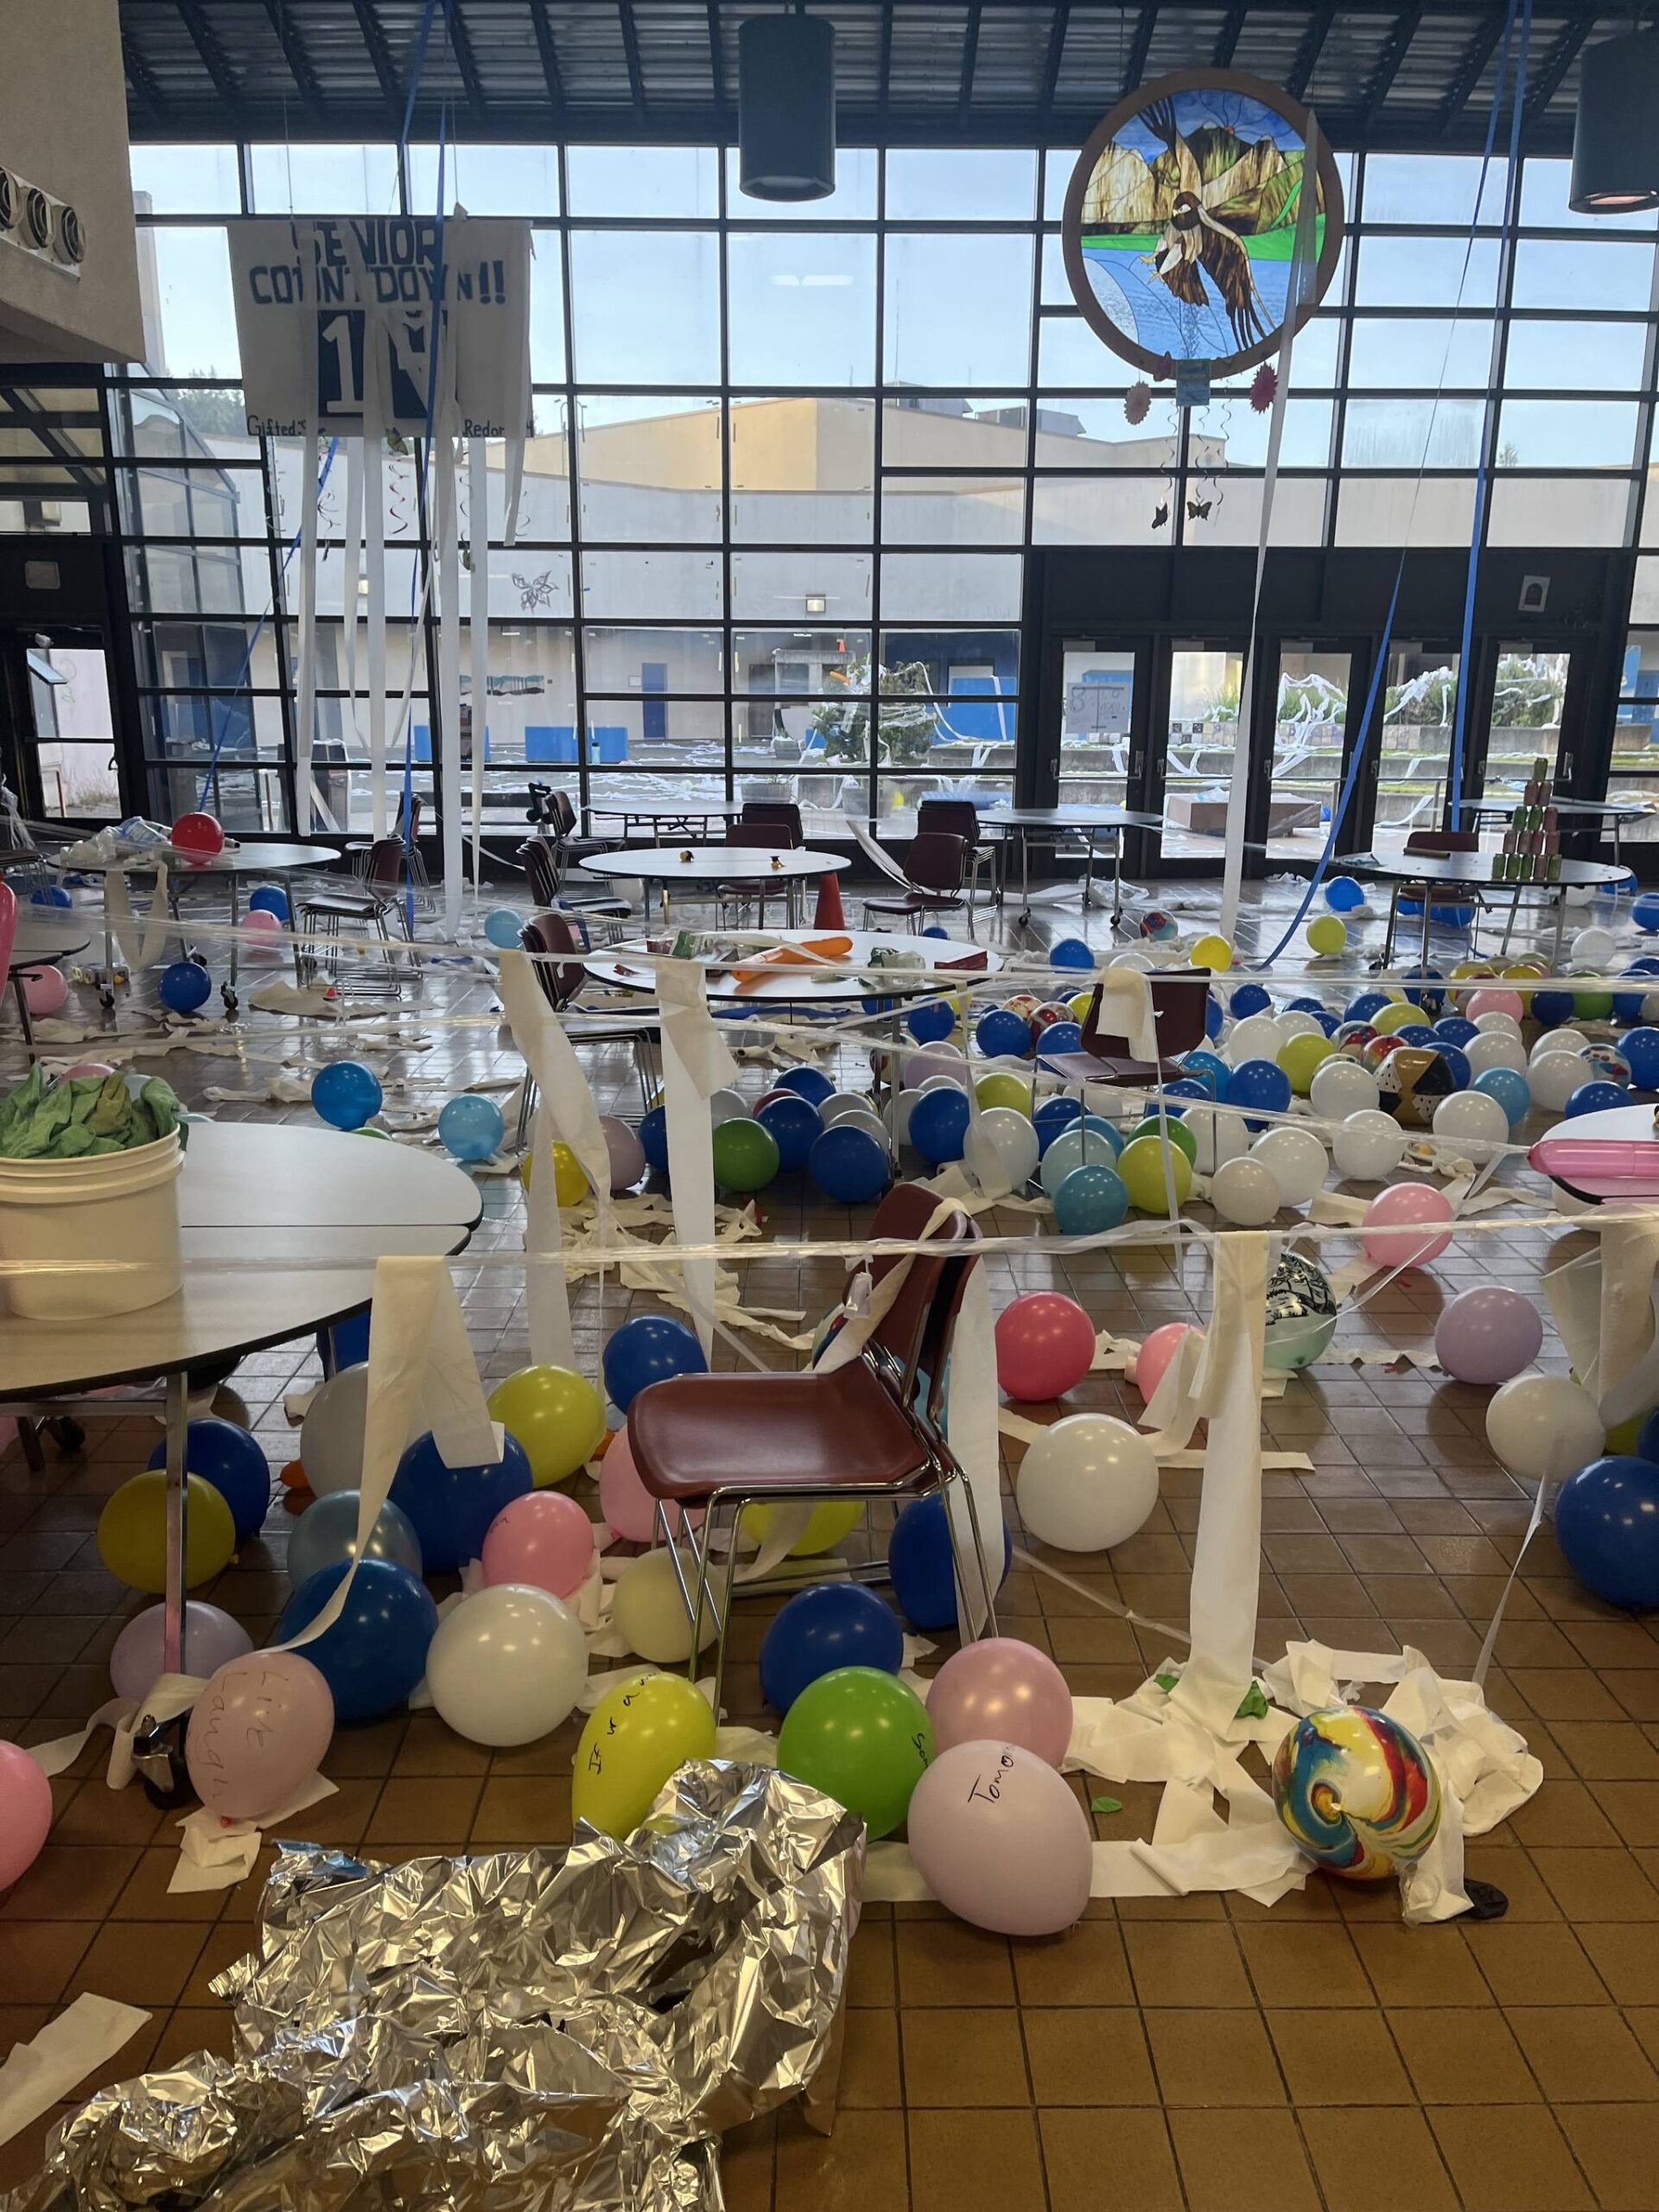 Sunday night, a group of seniors at South Whidbey High School littered the school with balloons, Silly String, Saran wrap and more. According to Superintendent Josephine Moccia, this took staff two hours to clean, though a student said seniors meant to clean the mess themselves and were unable to do so. (Photo provided)